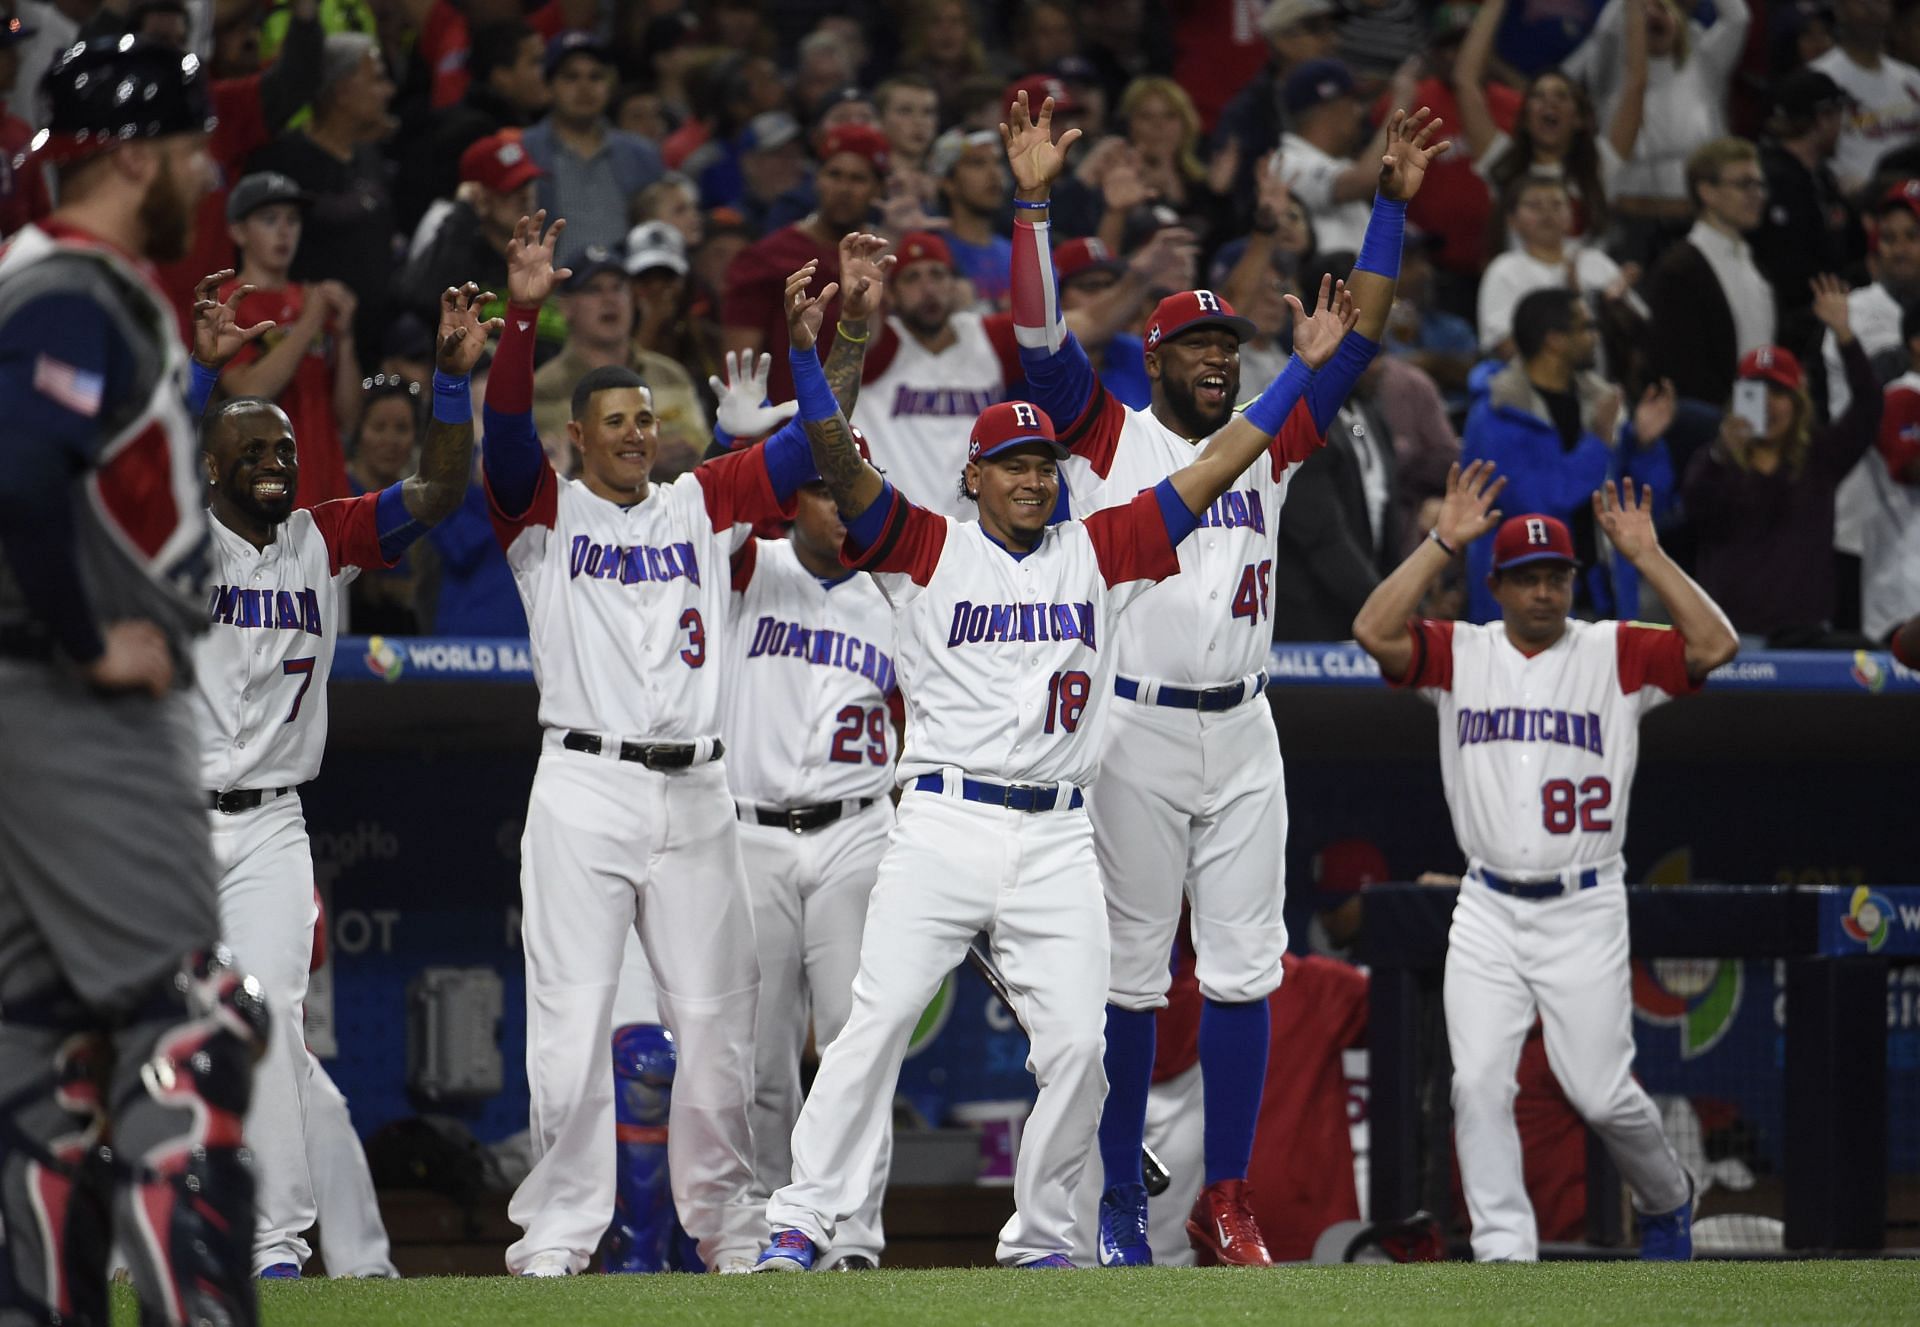 DR World Baseball Classic Roster Breaking down the talent stacked team